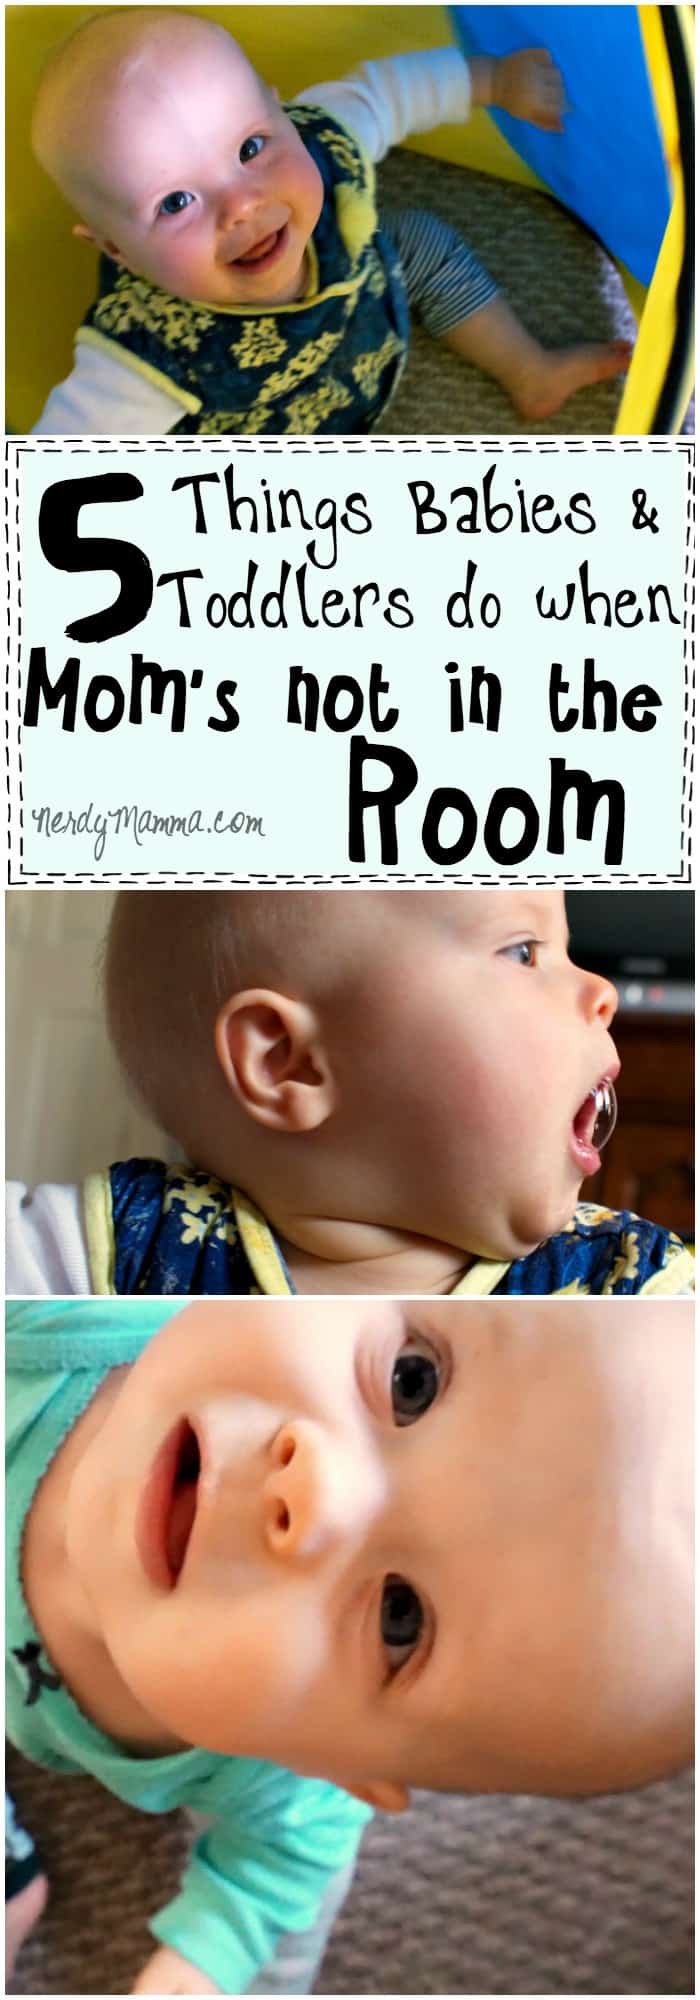 I love this Things Babies and Toddlers Do When Mom's Not in the Room...so funny! Love parenting humor!